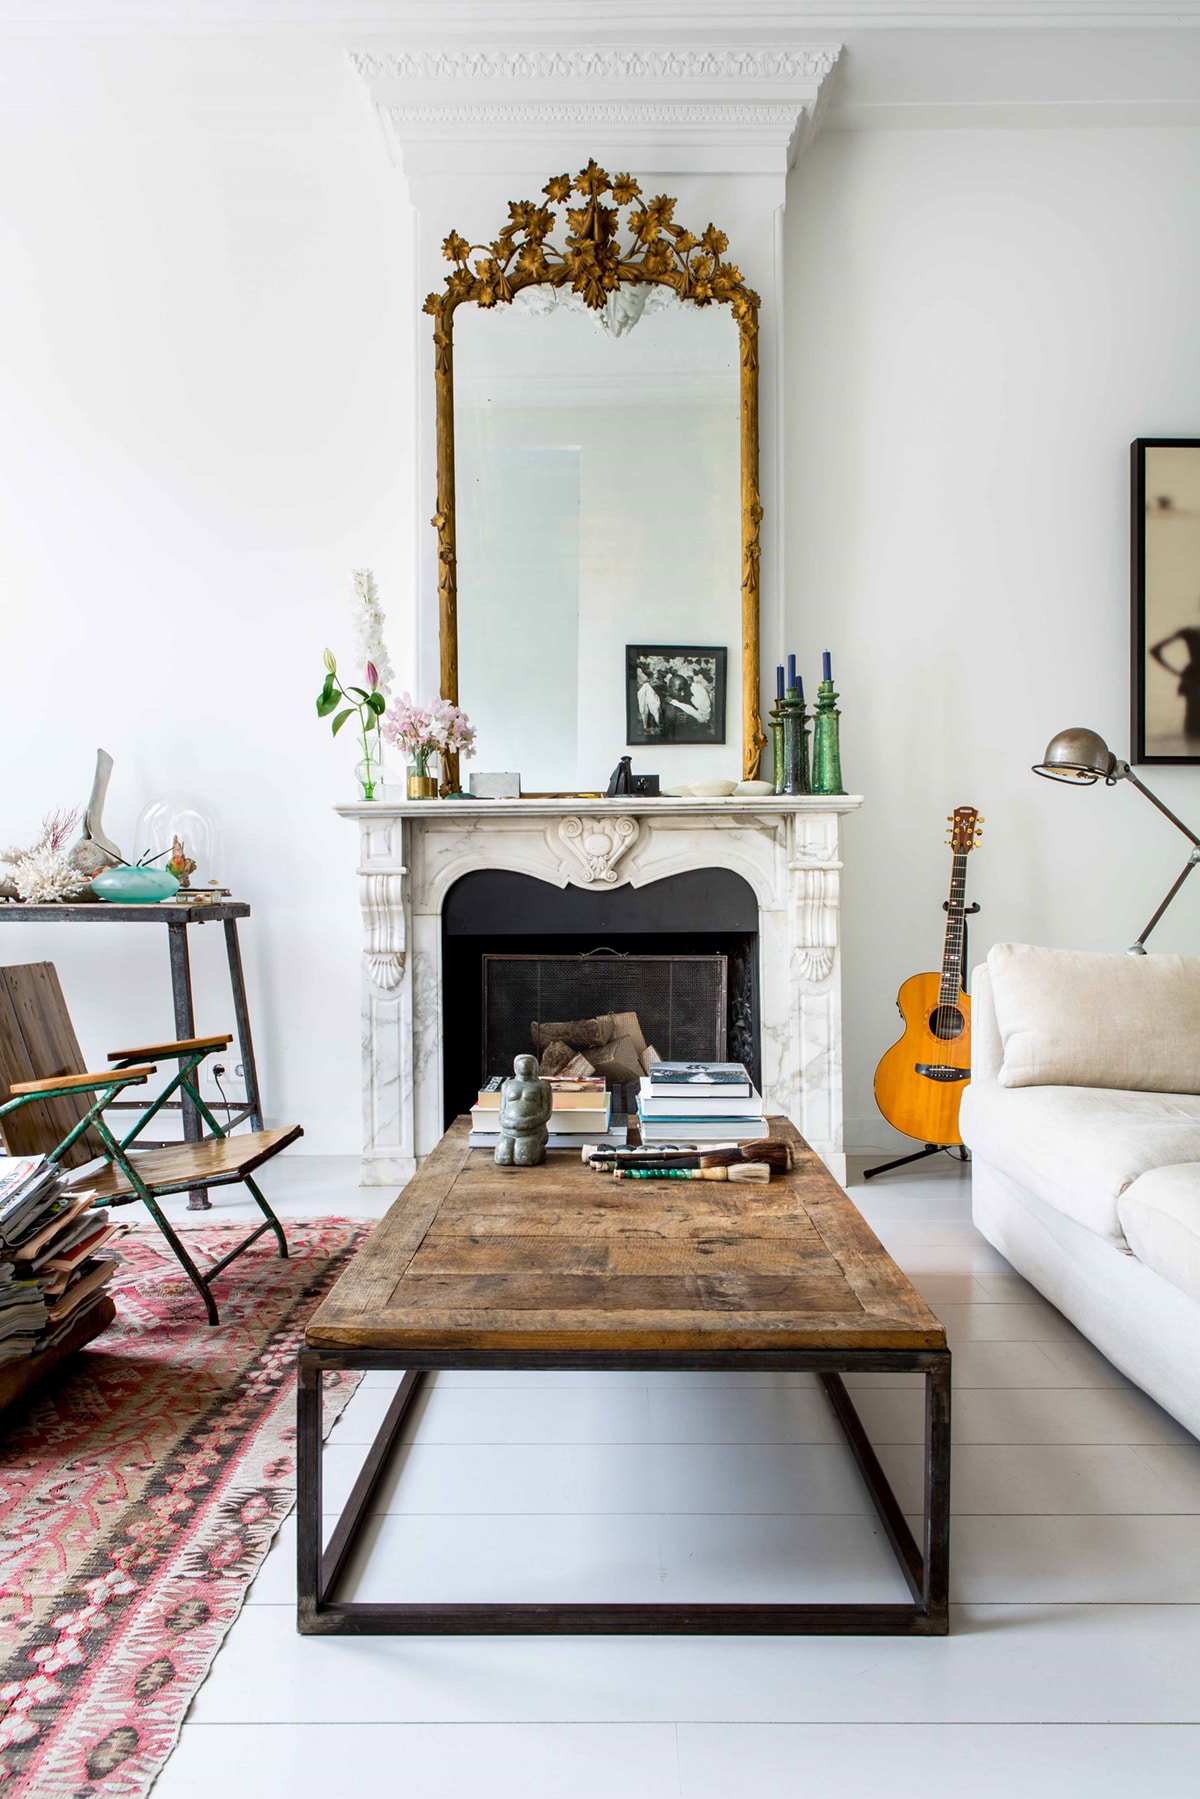 eclectic and curated living room | house tour on coco kelley